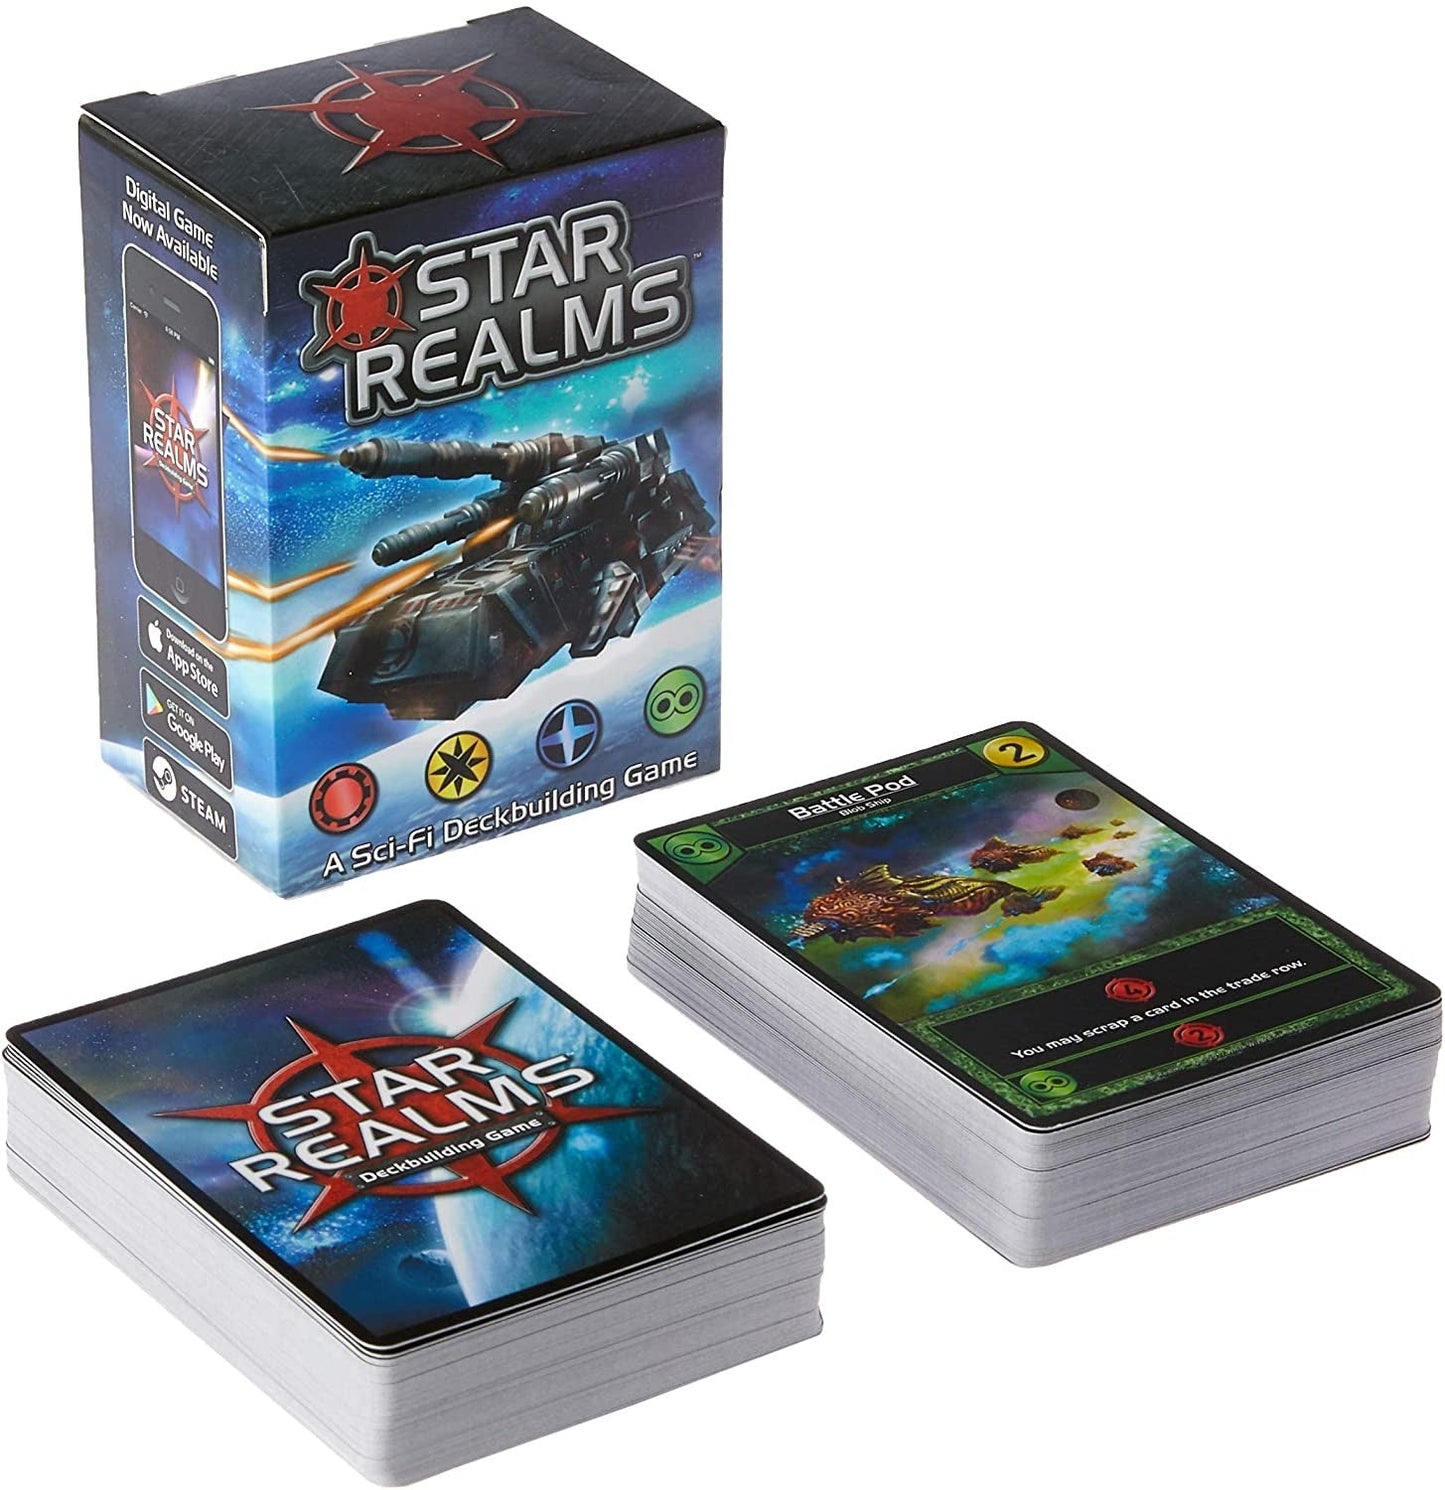 Star Realms contents